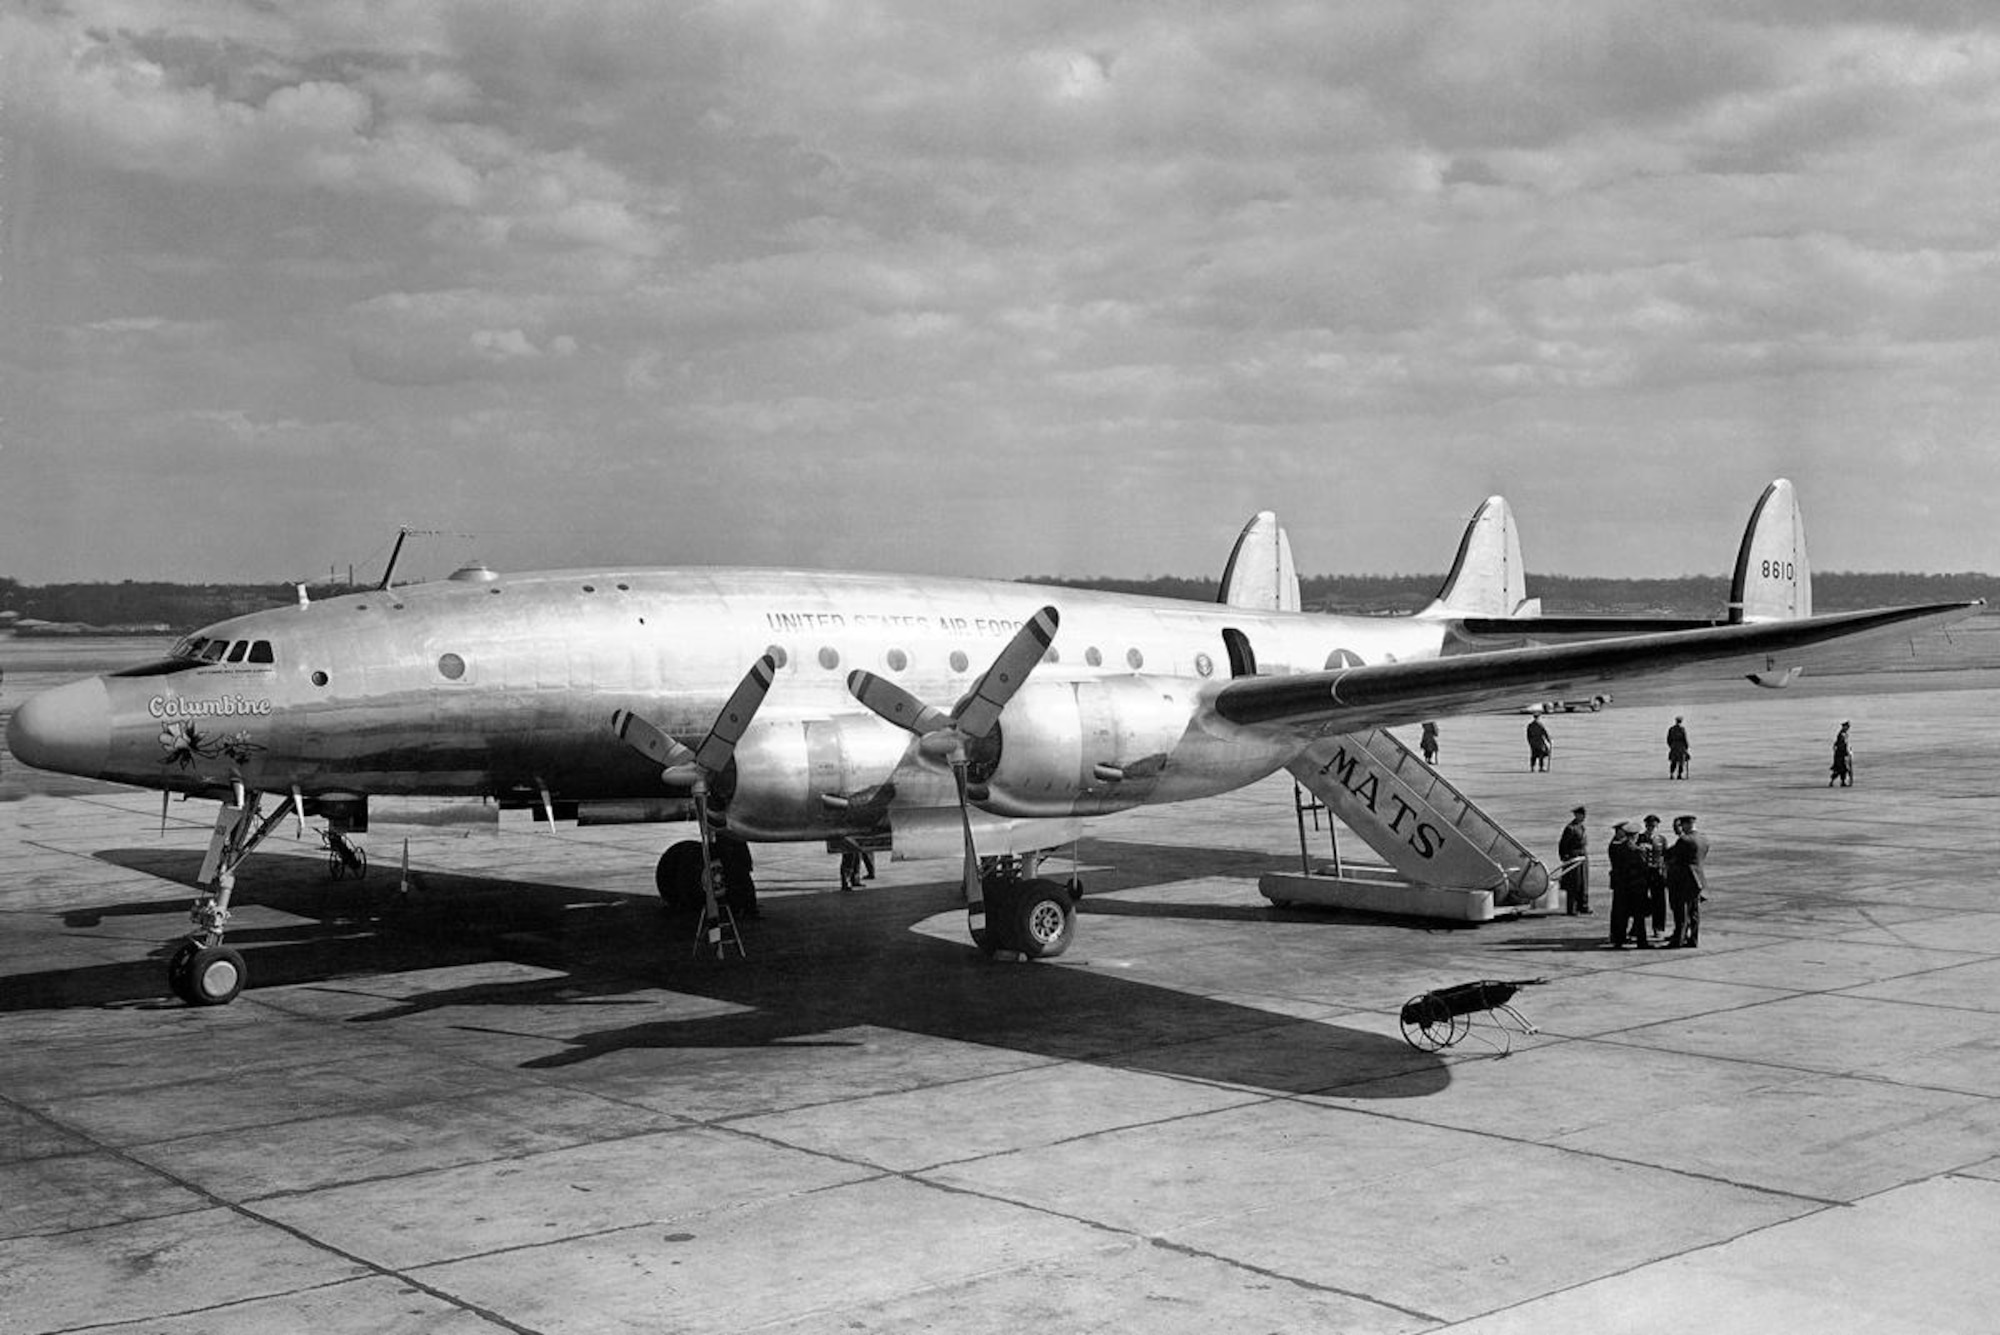 C-121 Constellation, 1968: The C-121A was the military variant of the commercial Model 749 Constellation. Between 1948 and 1955 the USAF ordered 150 C-121As for use as cargo/passenger carriers, executive transports, and airborne early warning aircraft. As a troop carrier, they could carry a maximum of 44 passengers. Military use of the “Connie” spanned three wars: World War II, Korea and Vietnam and they were used extensively by both military and civilian airlines until the early 1960s. In addition, in 1967, an RC-121 was the first aircraft to provide Airborne Warning and Control intercept information to an Air Force fighter intercepting and shooting down a MiG over Vietnam.